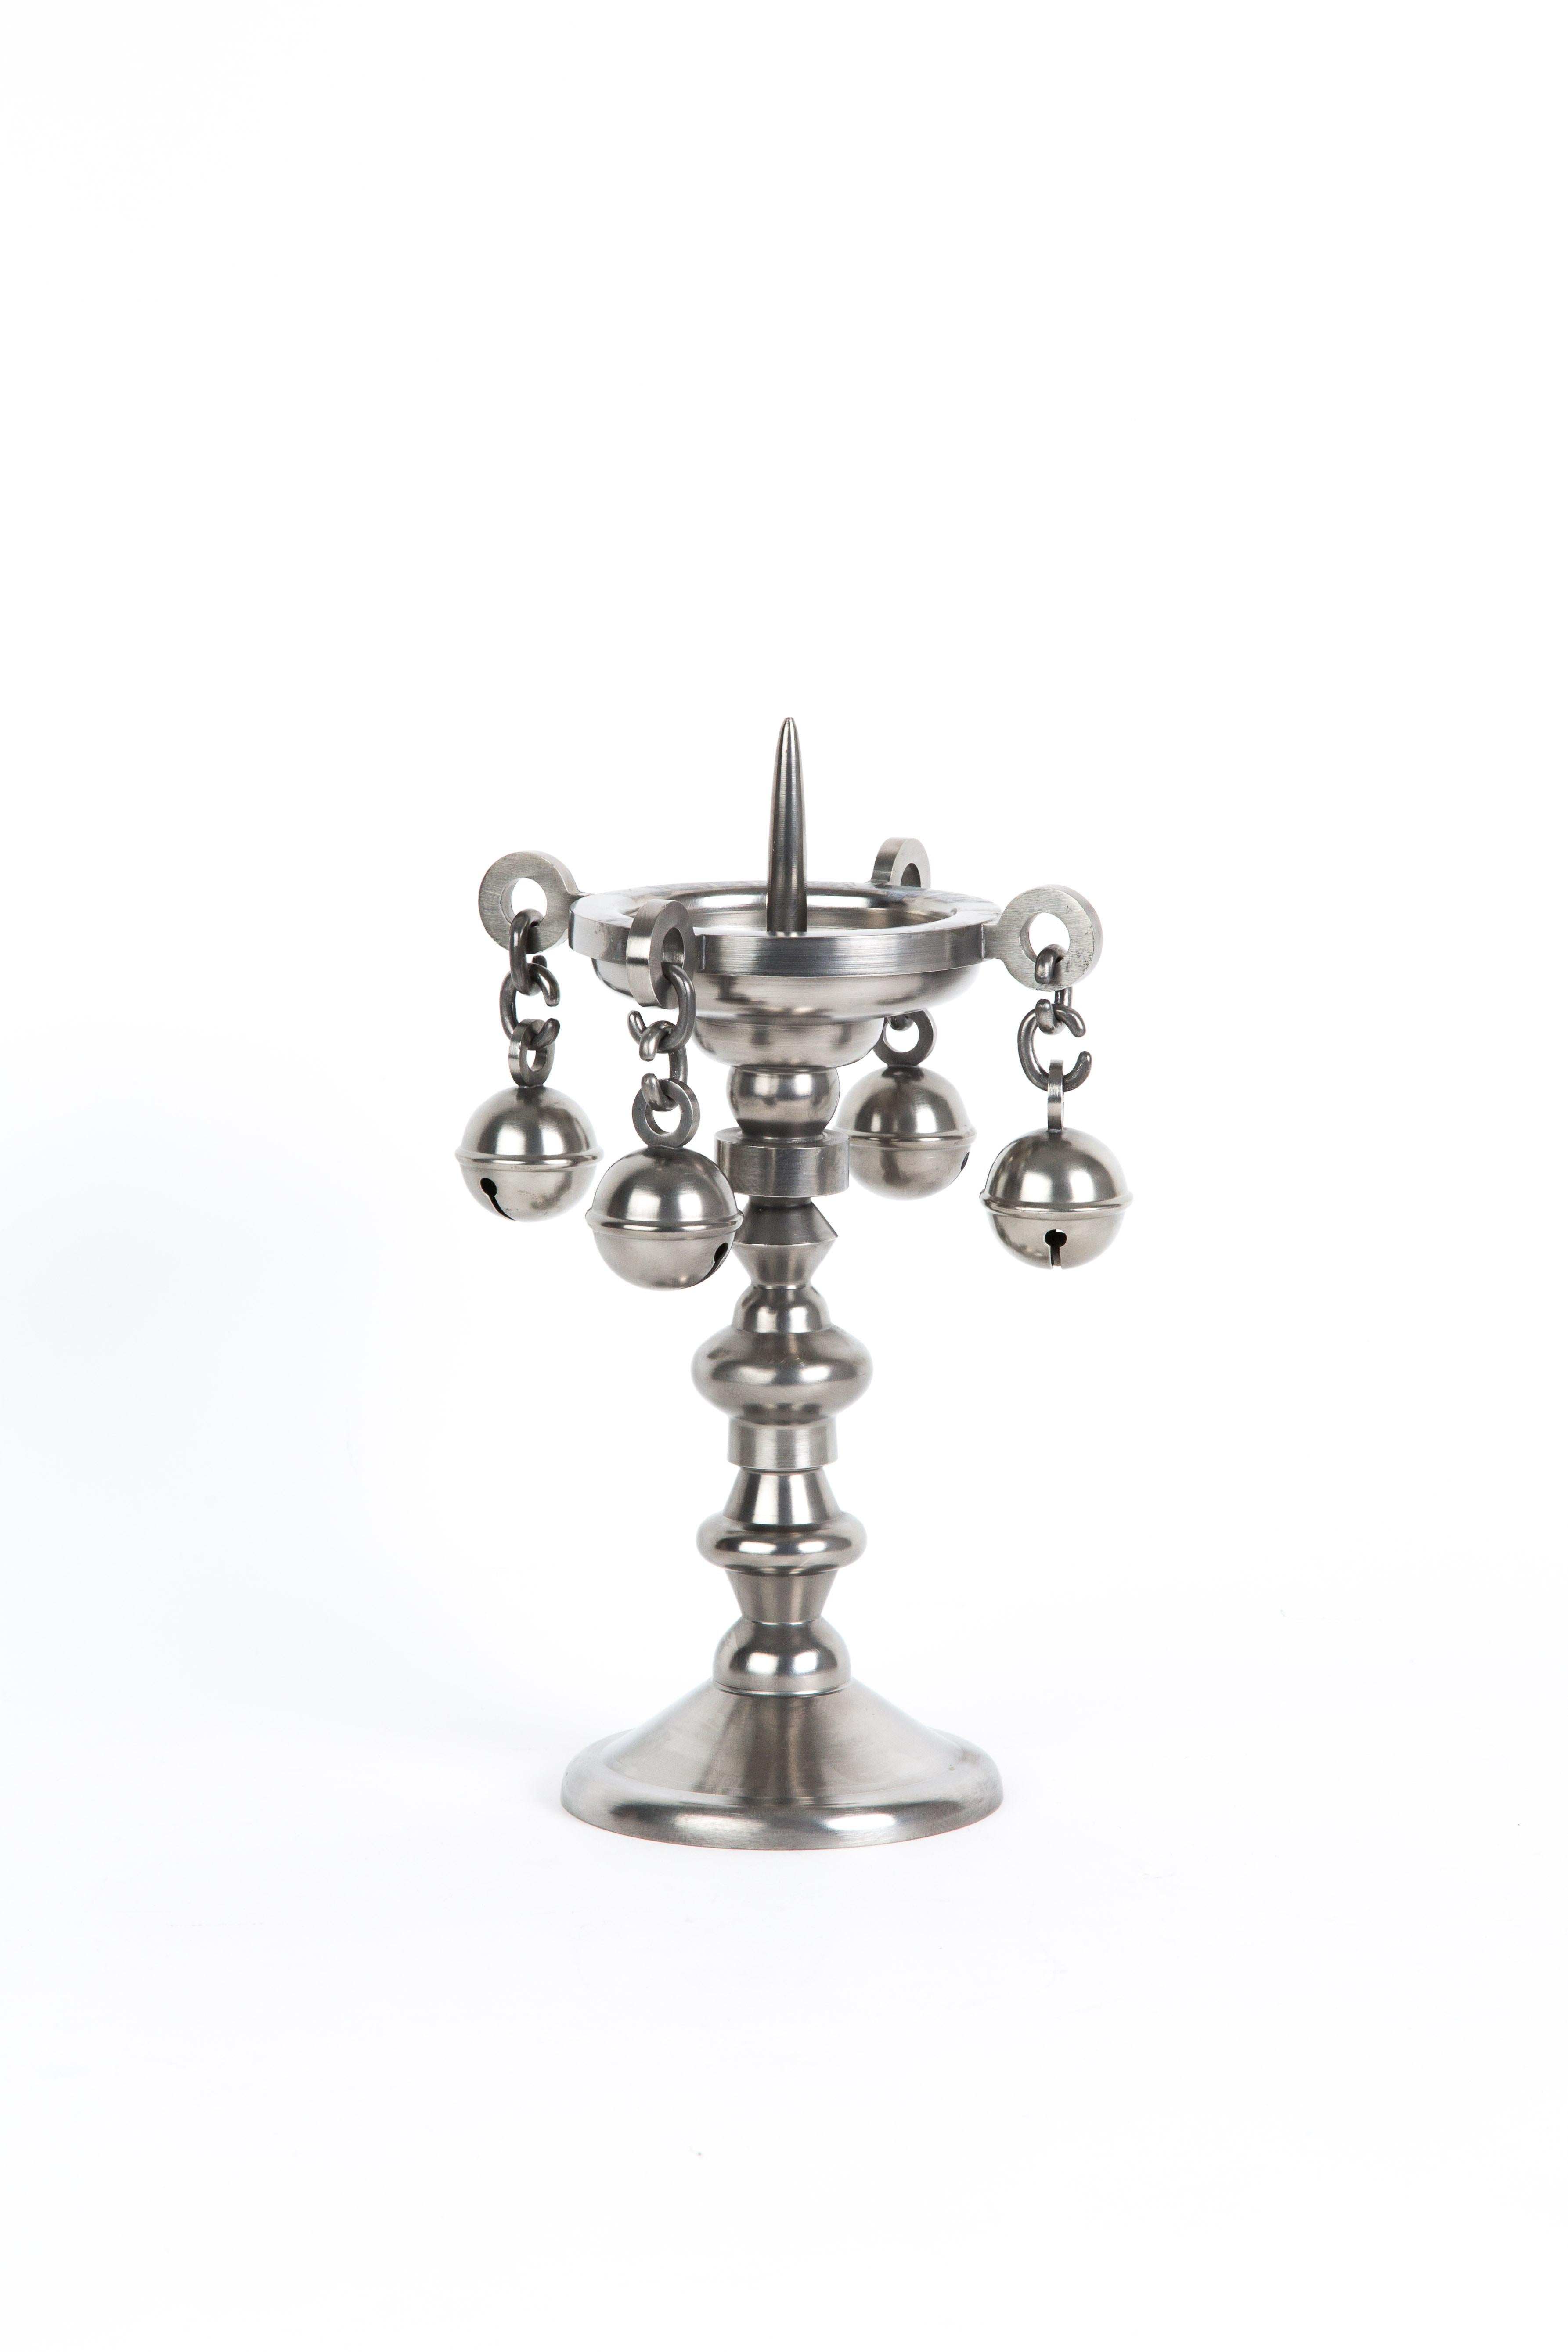 Studio job. Massive pewter candleholder. Limited edition of 150. This is number 127/150. Candleholder as piece of art.